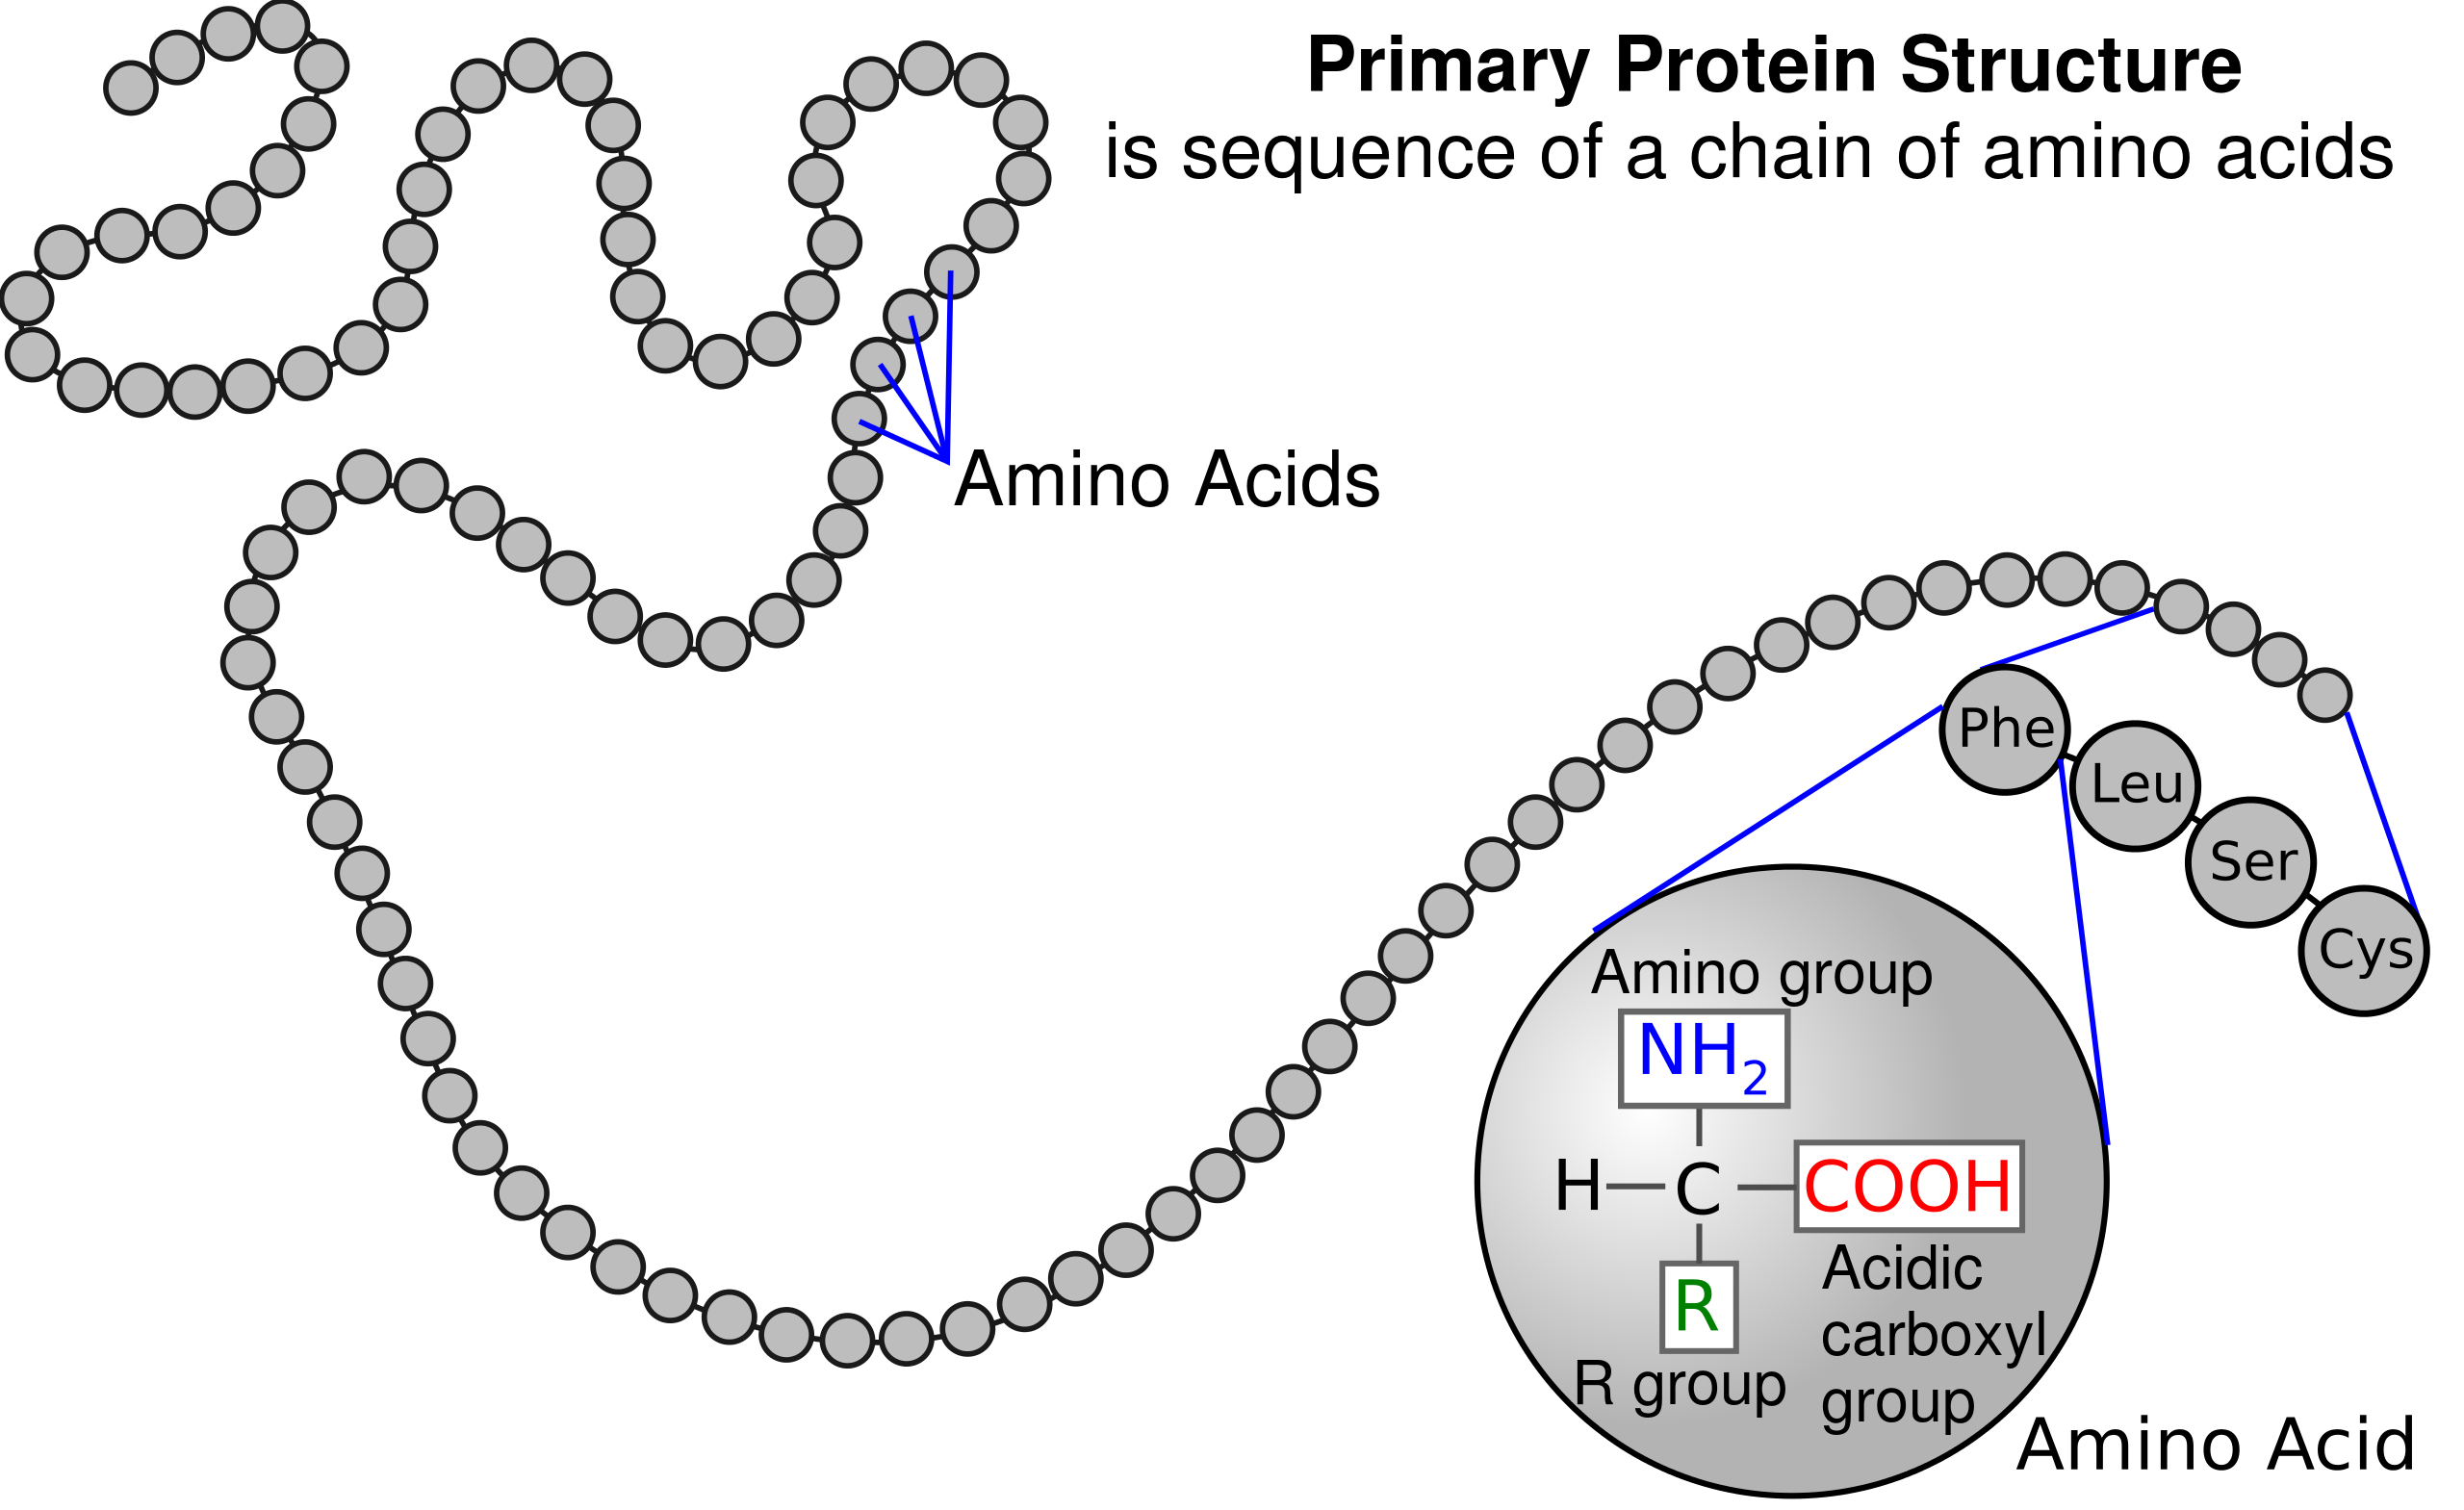 <p>SEQUENCE OF AMINO ACIDS</p>